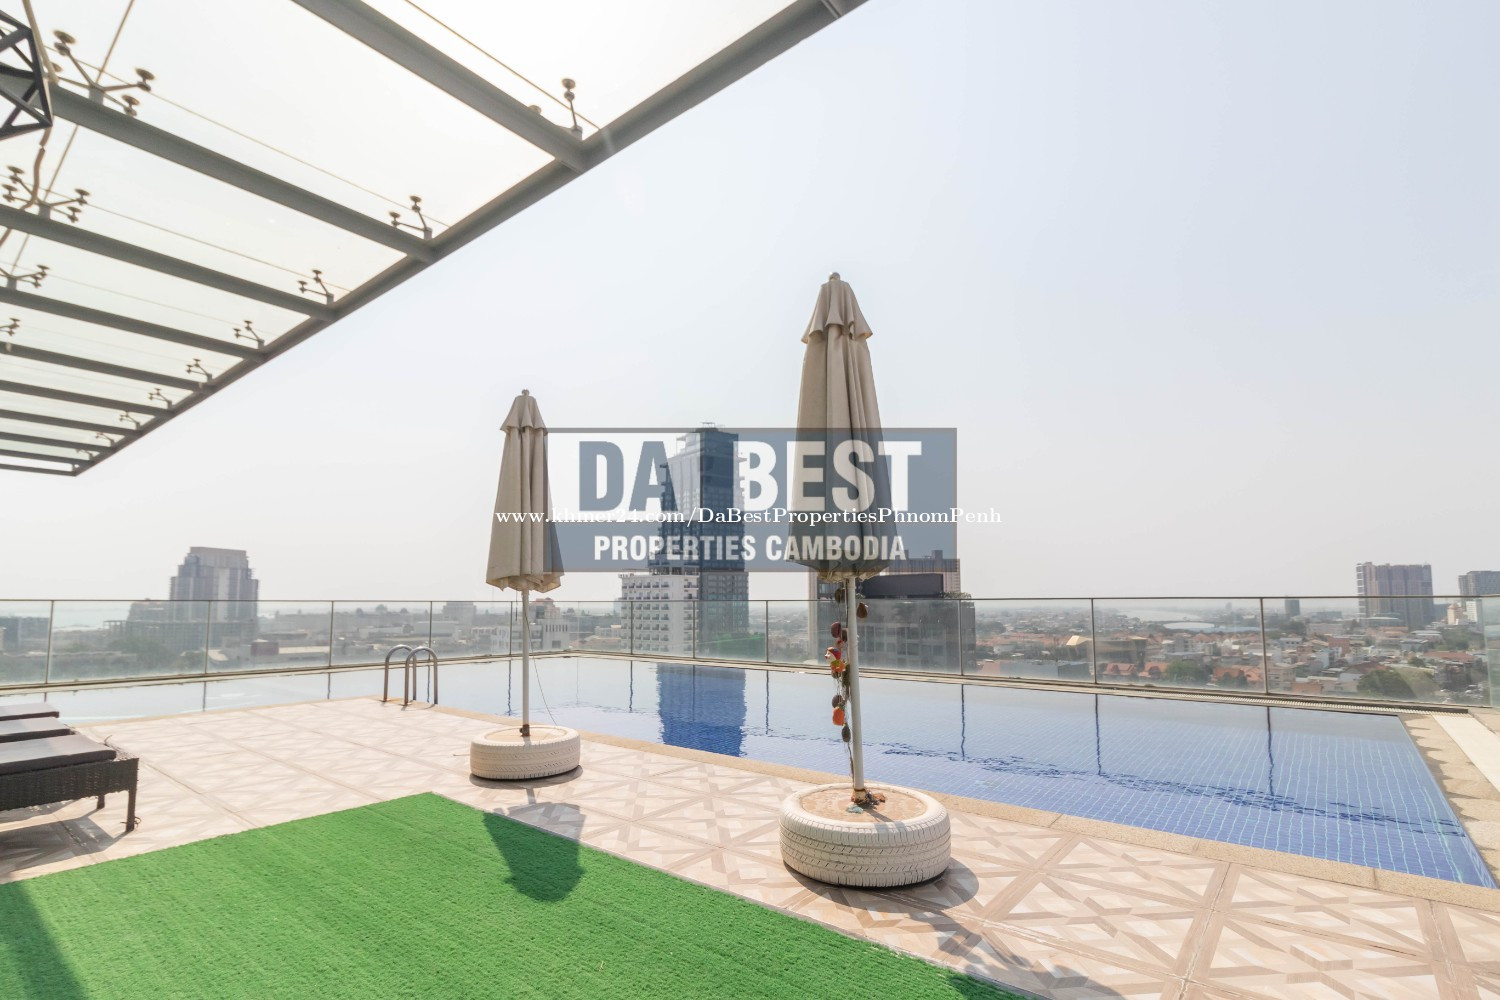 DABEST PROPERTIES: 1 Bedroom Apartment for Rent with Gym, Swimming pool in Phnom Penh